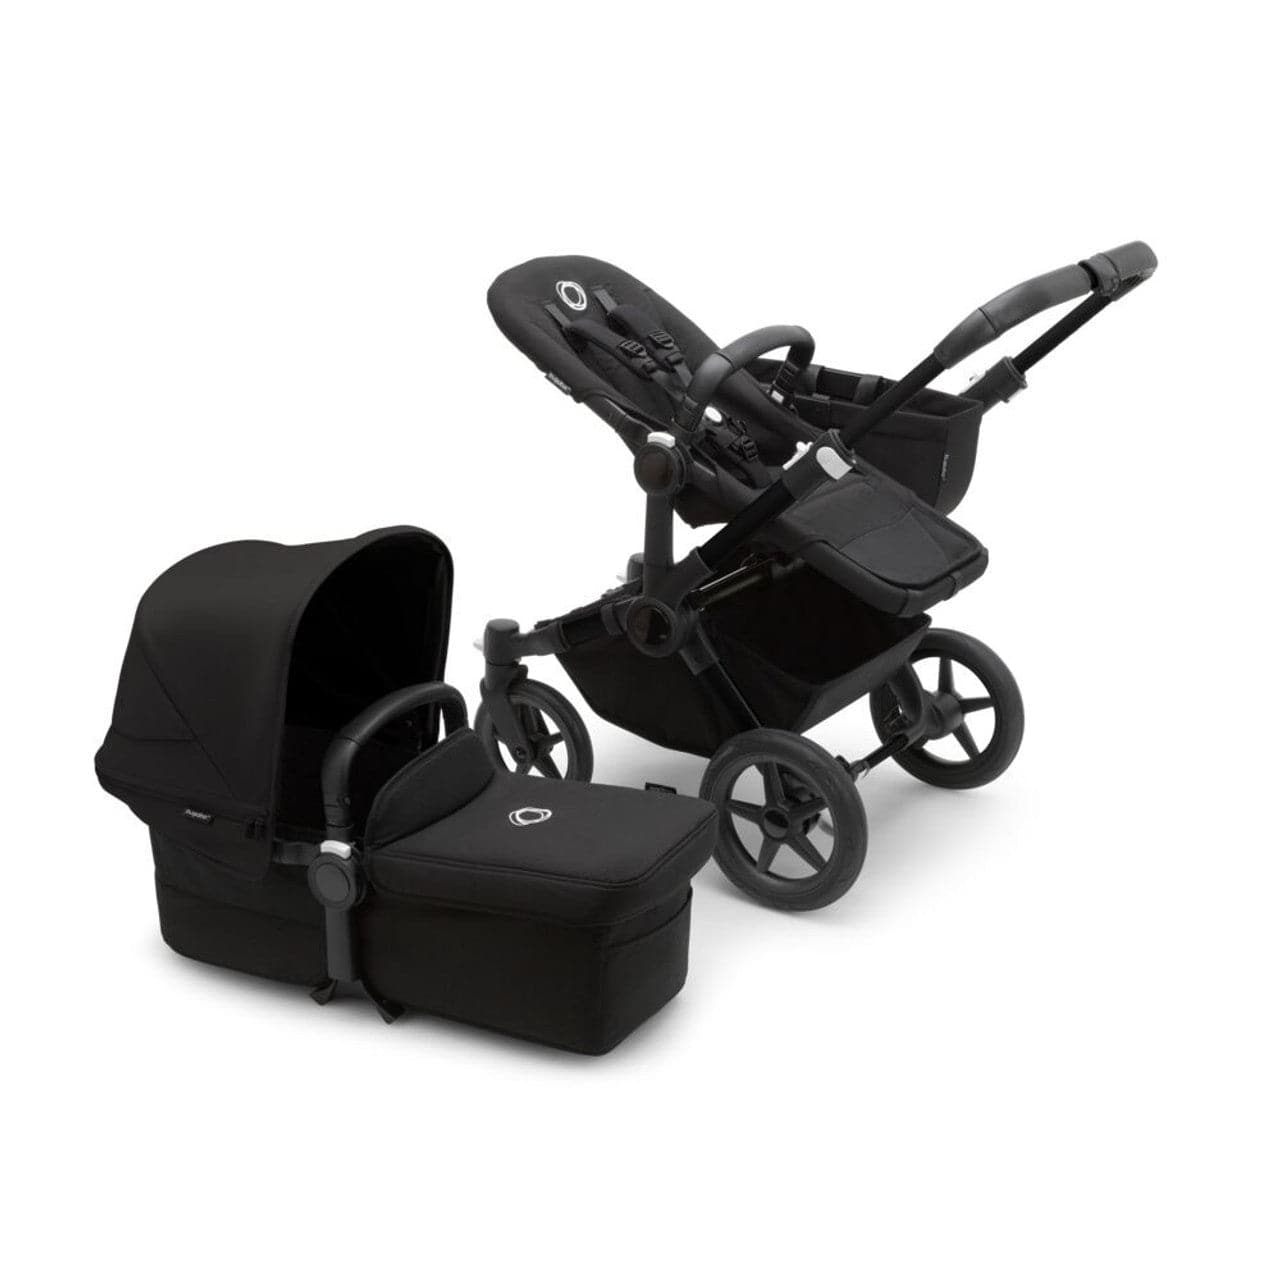 Bugaboo Donkey 5 Twin Complete Travel System + Turtle Air - Black/Midnight Black - For Your Little One